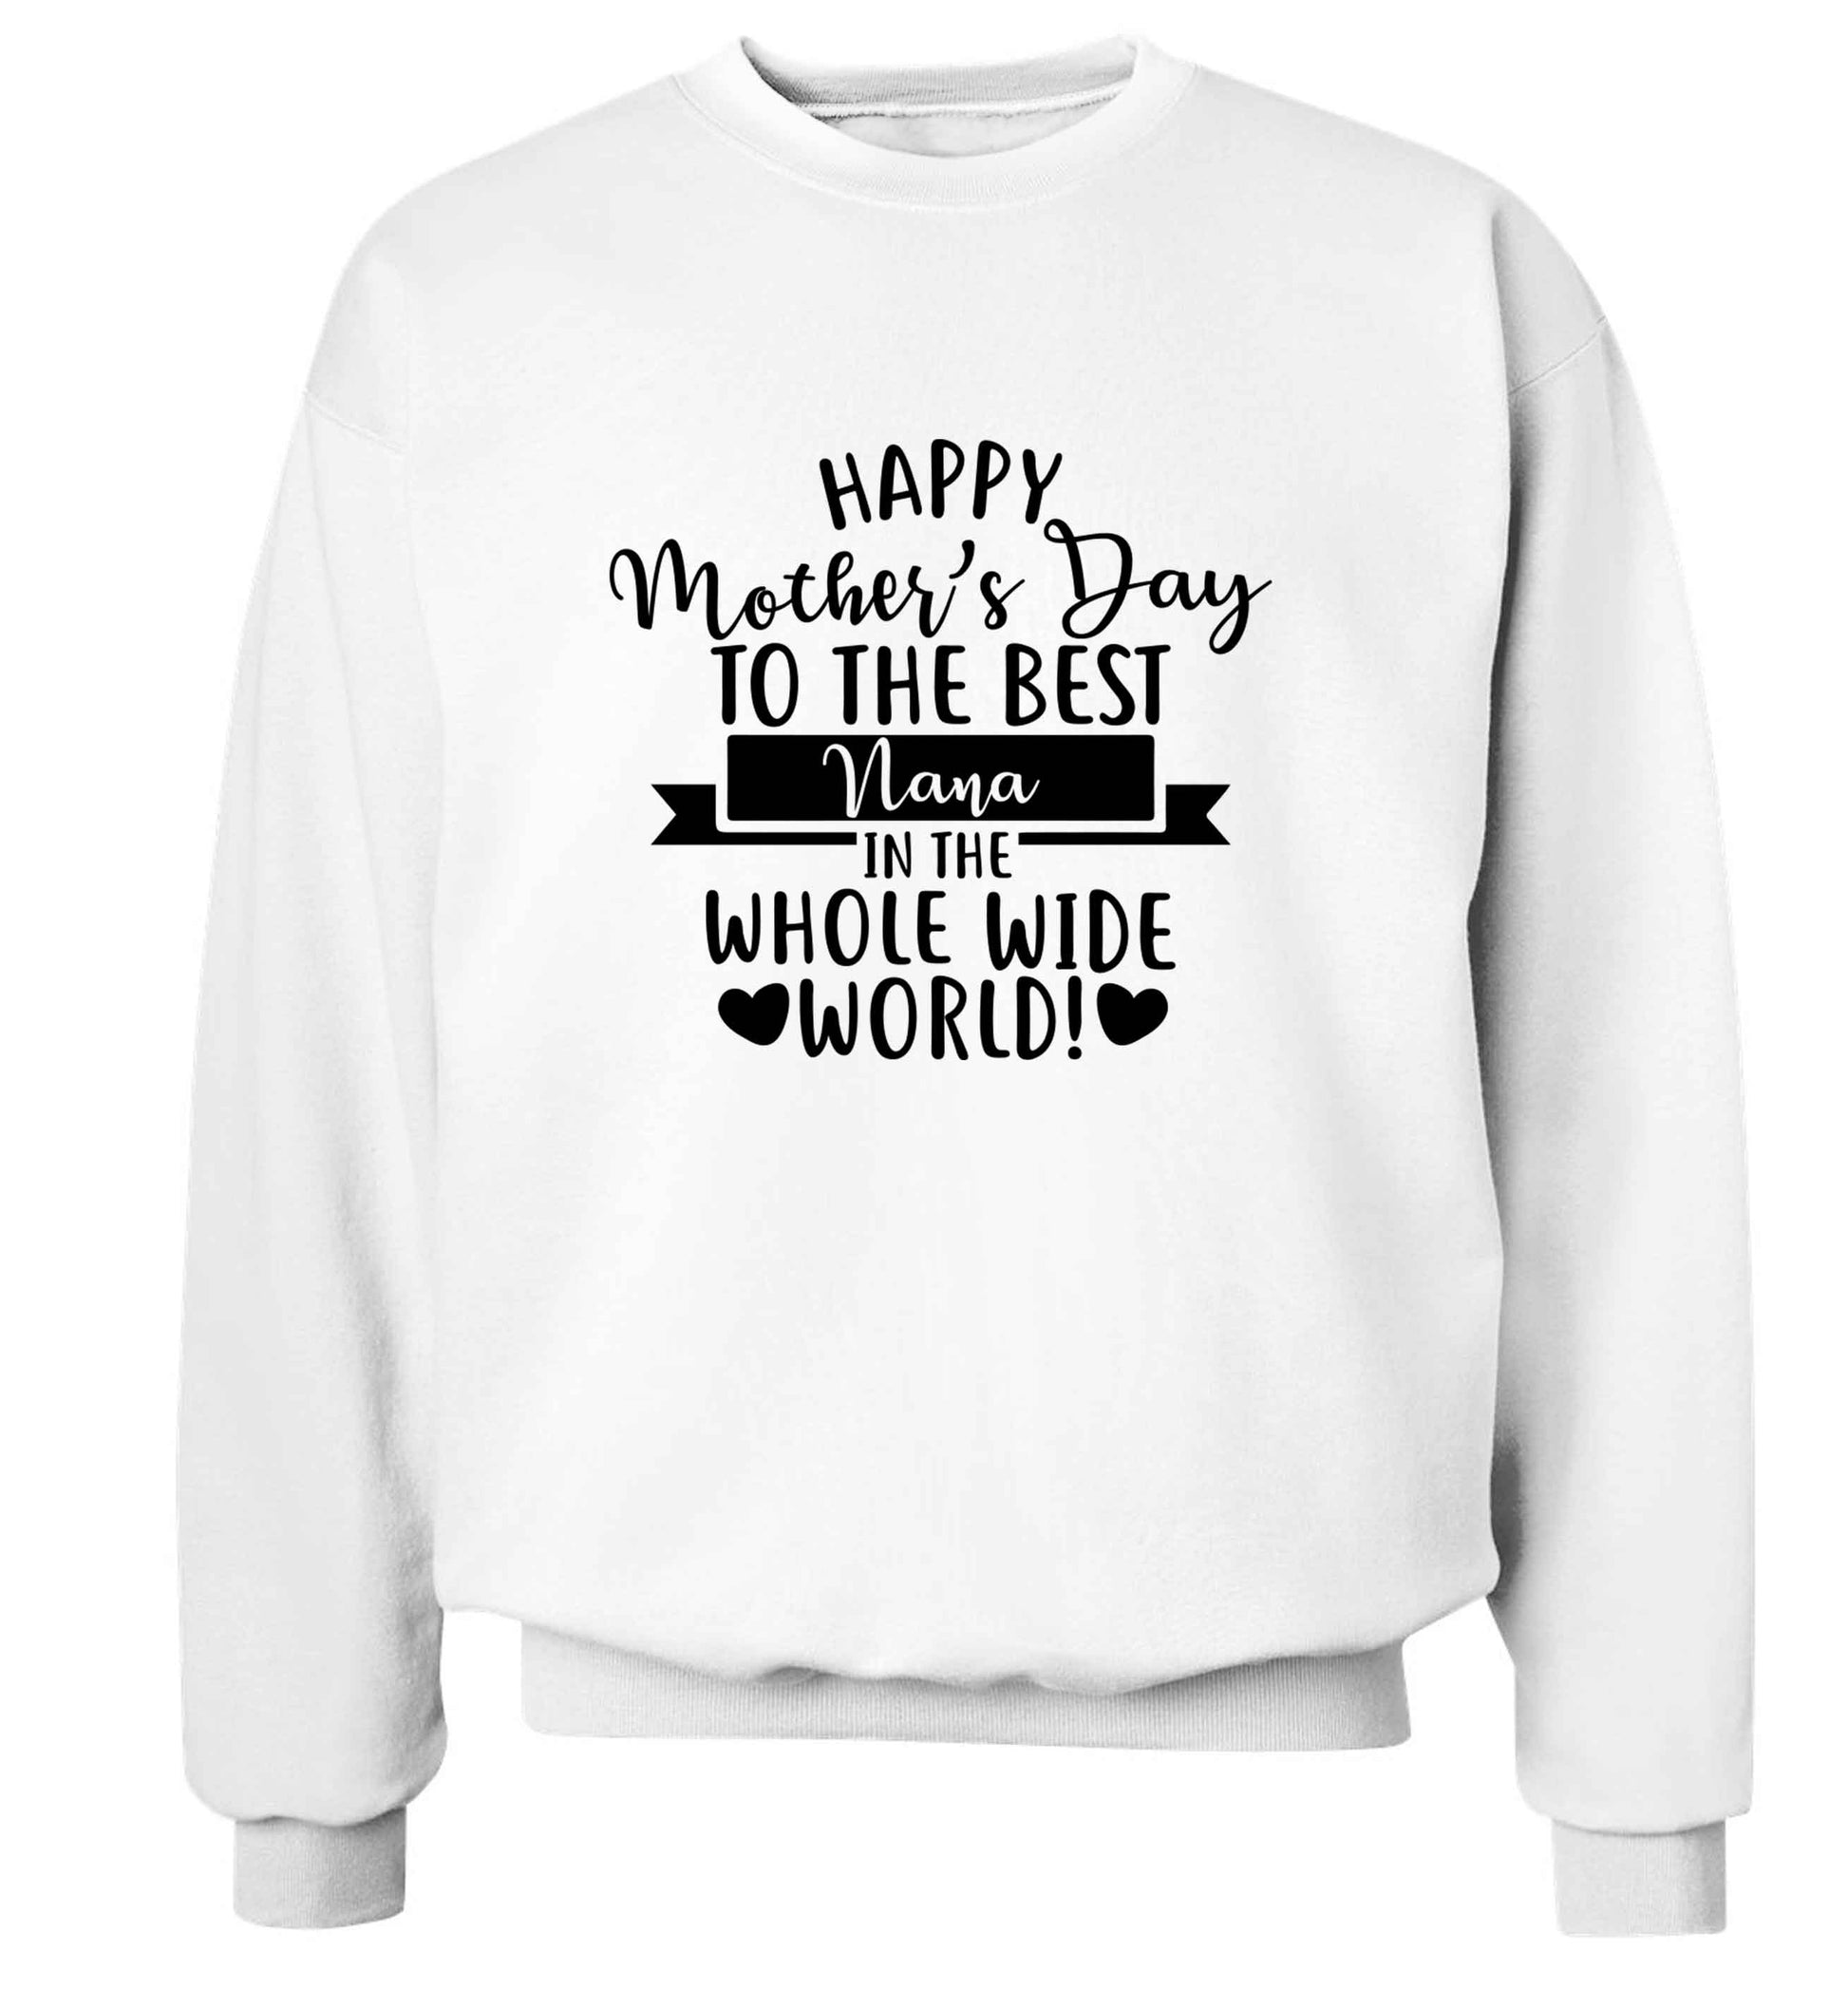 Happy mother's day to the best nana in the world adult's unisex white sweater 2XL